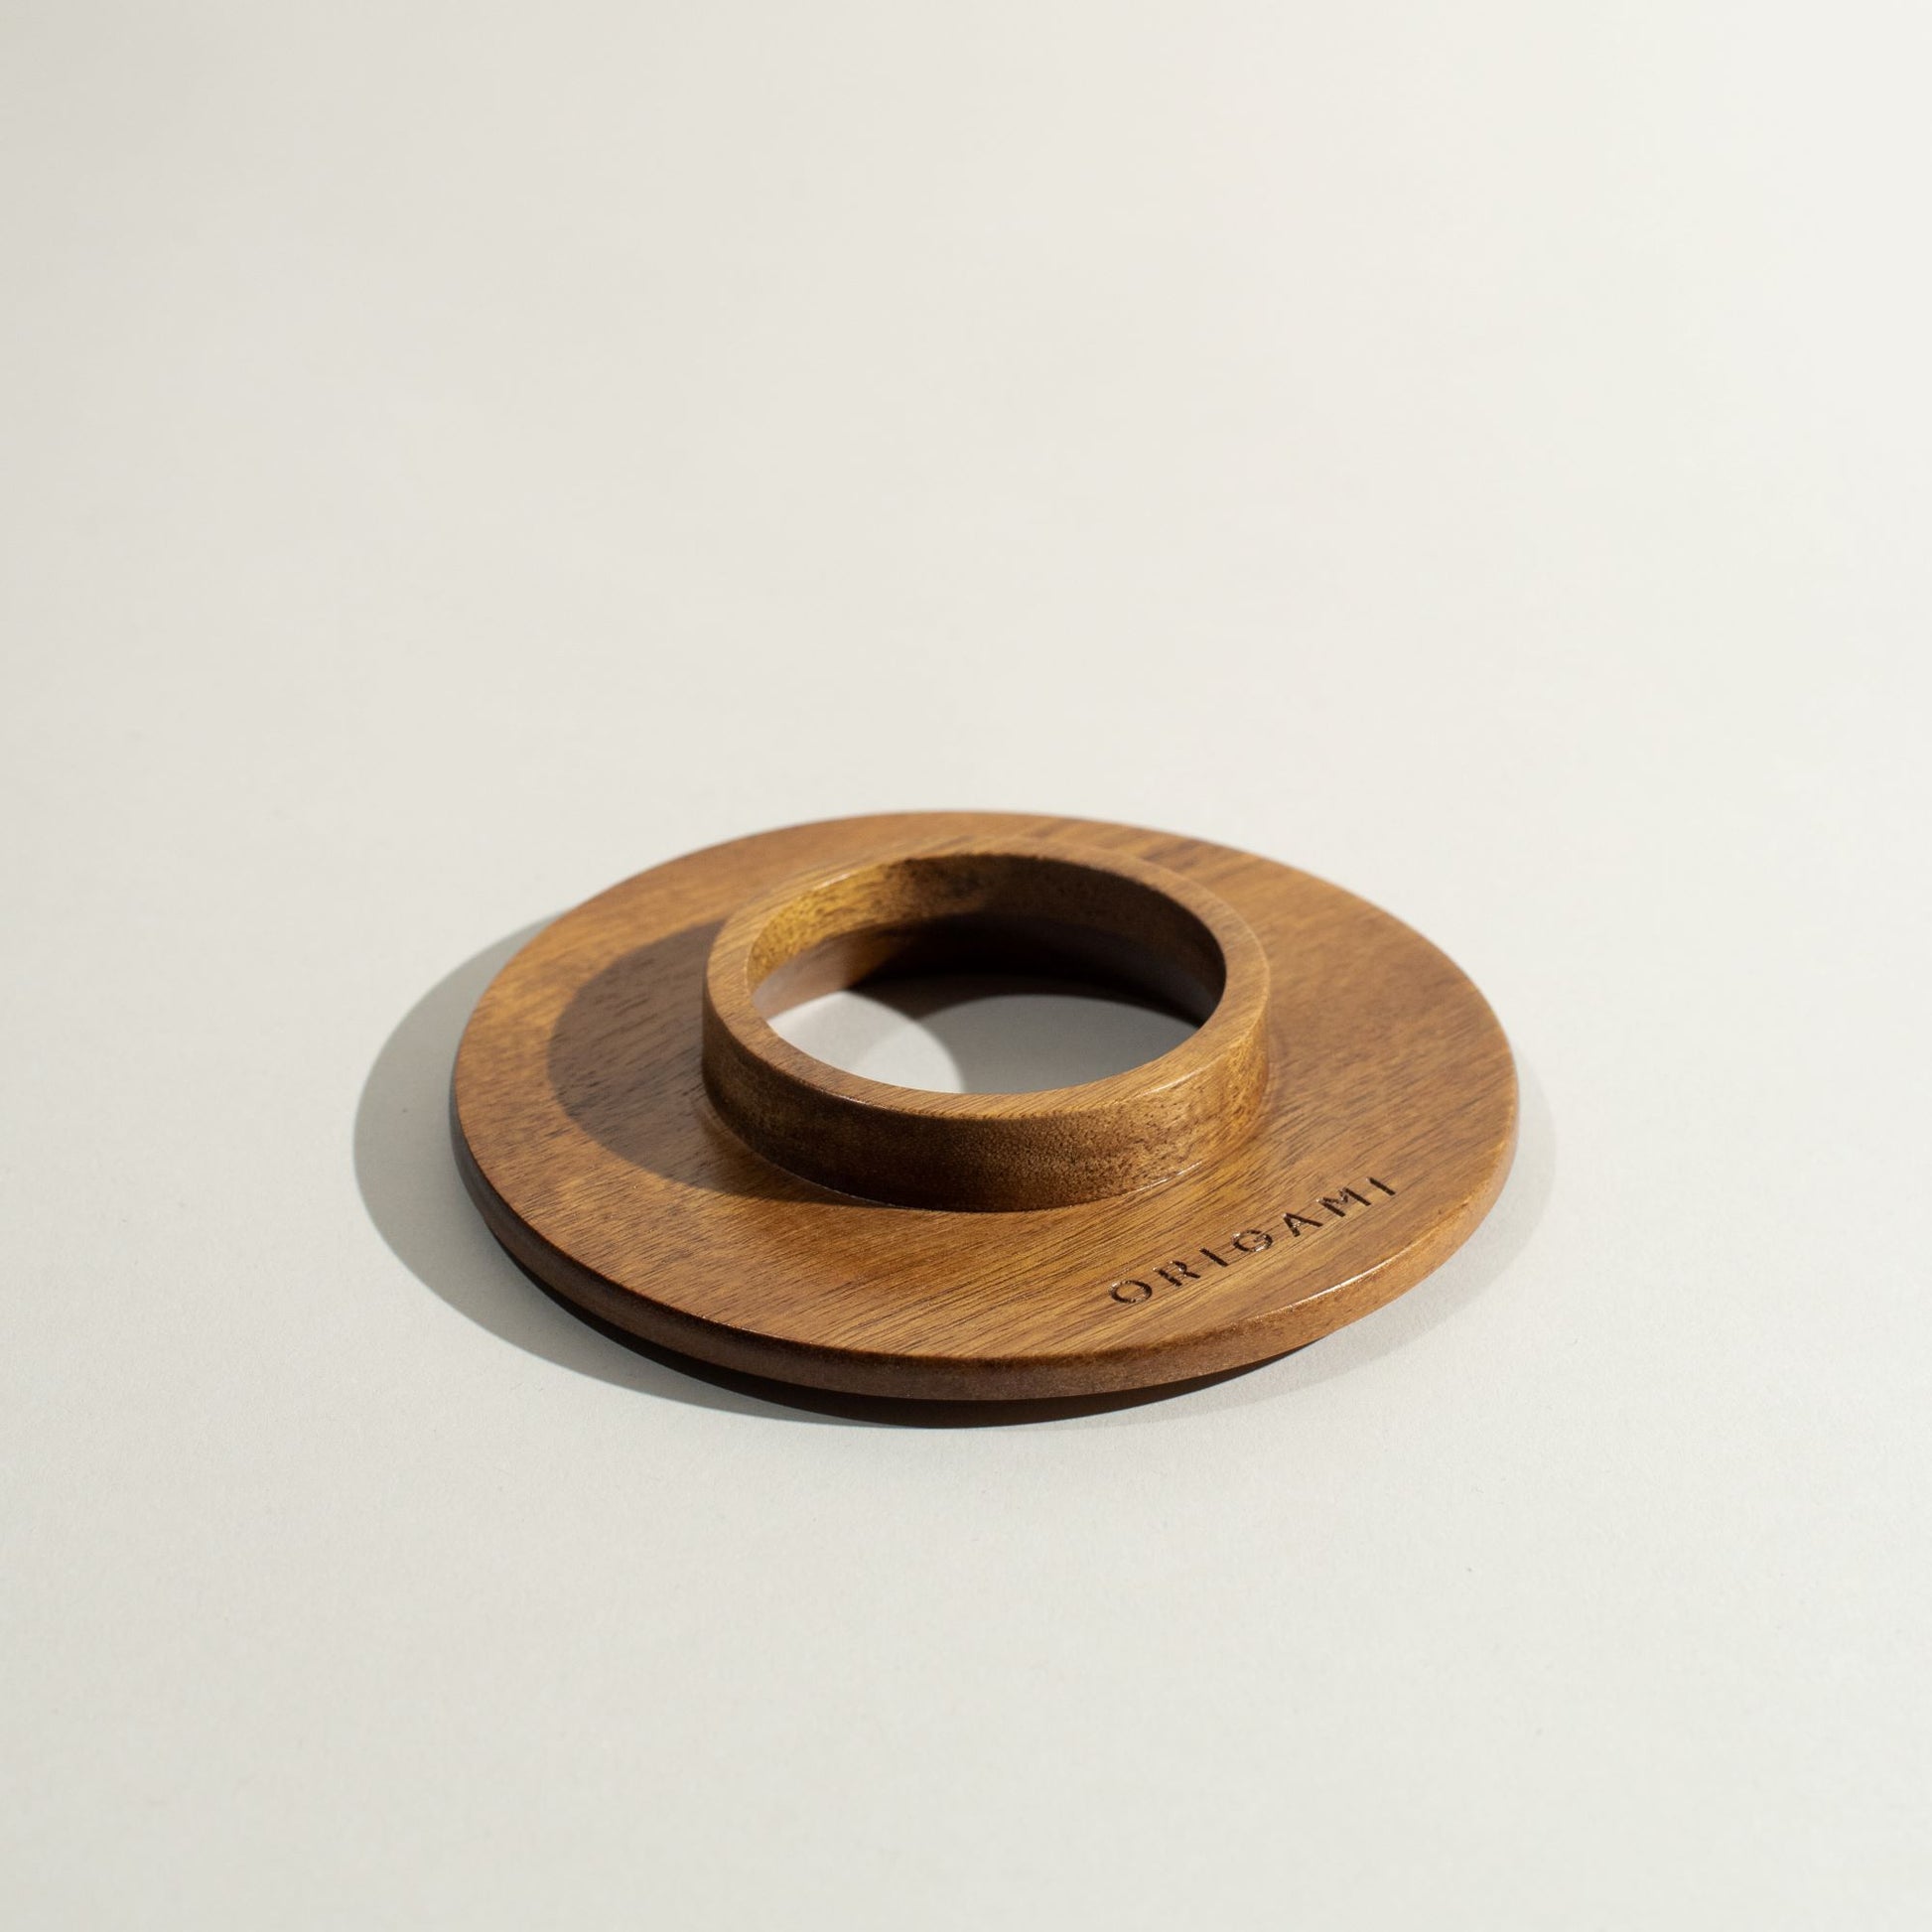 Wooden Holder for Origami small, medium and air s